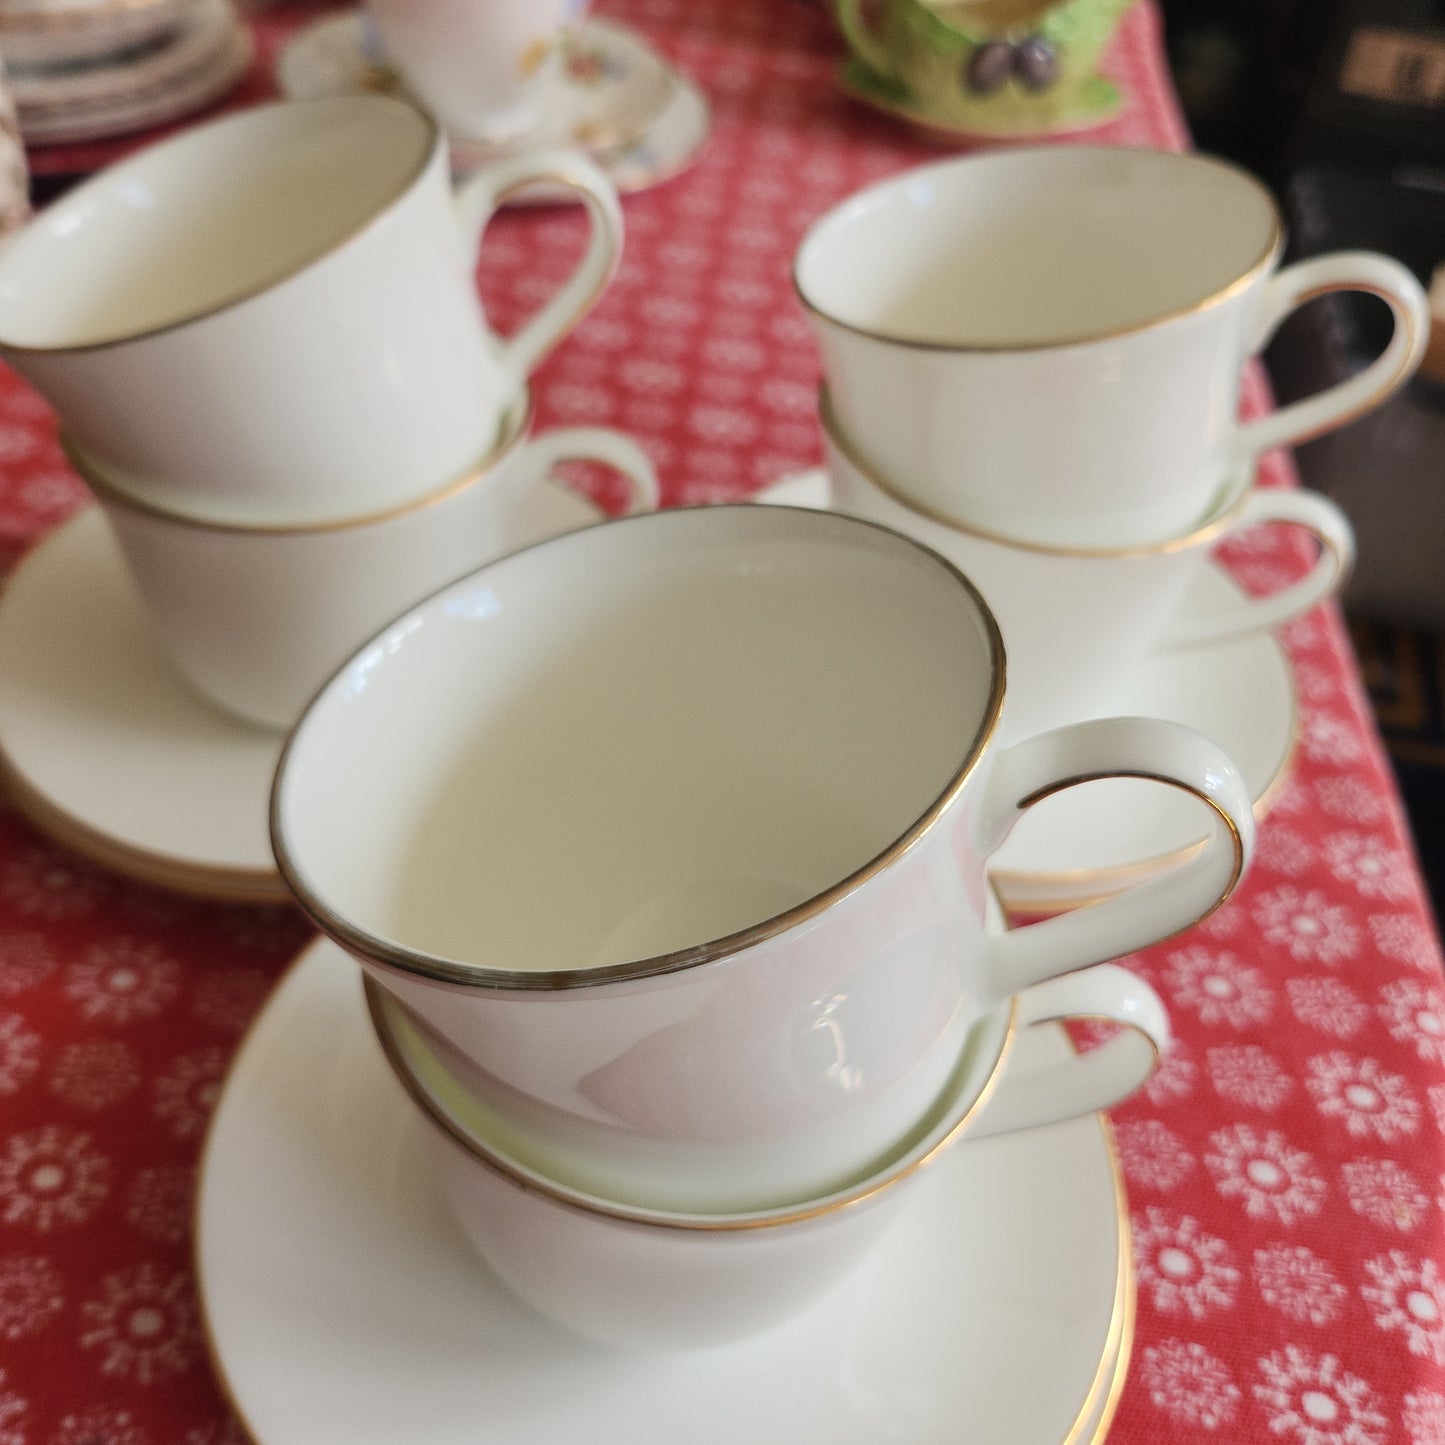 Royal Doulton classic white and gold Teaset